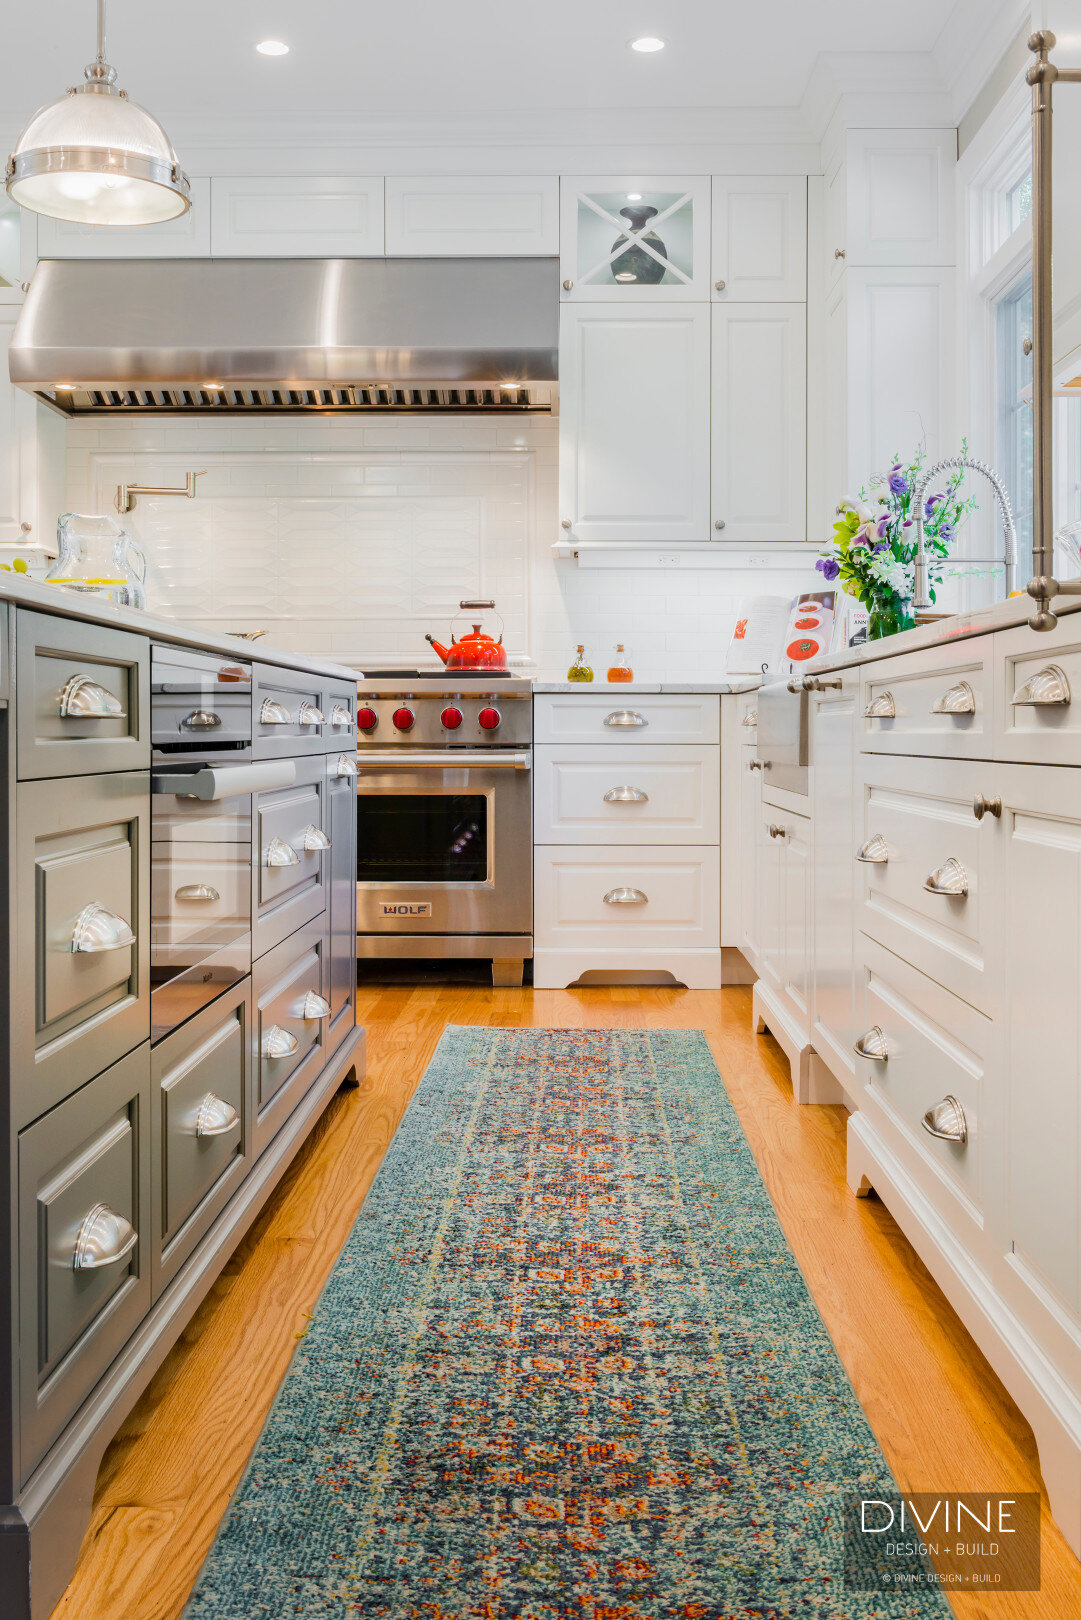 traditional shaker style kitchens with stainless steel farmhouse sink, wolf appliances and chrome pendant lights. Calacatta countertops and medium hardwood floors. Paneled refrigerator. 